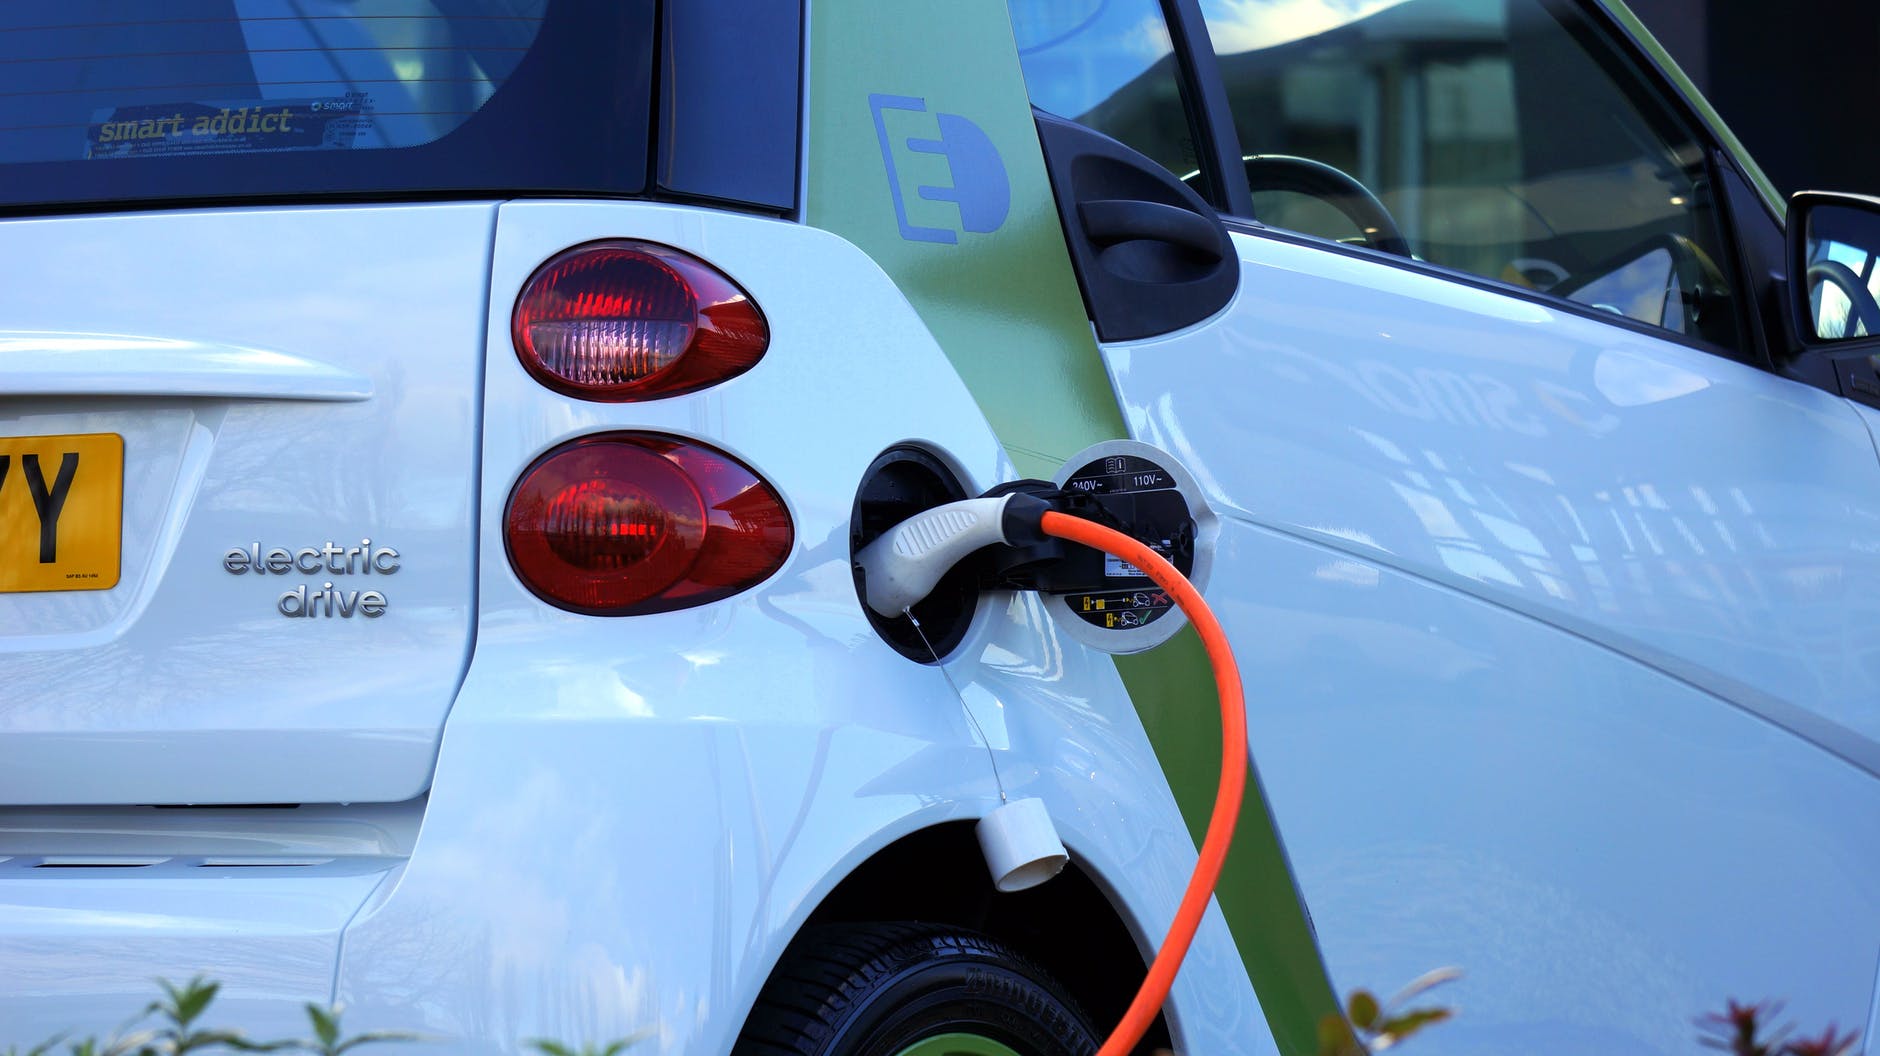 “The Time is Right for electric cars- in fact, the time is critical”